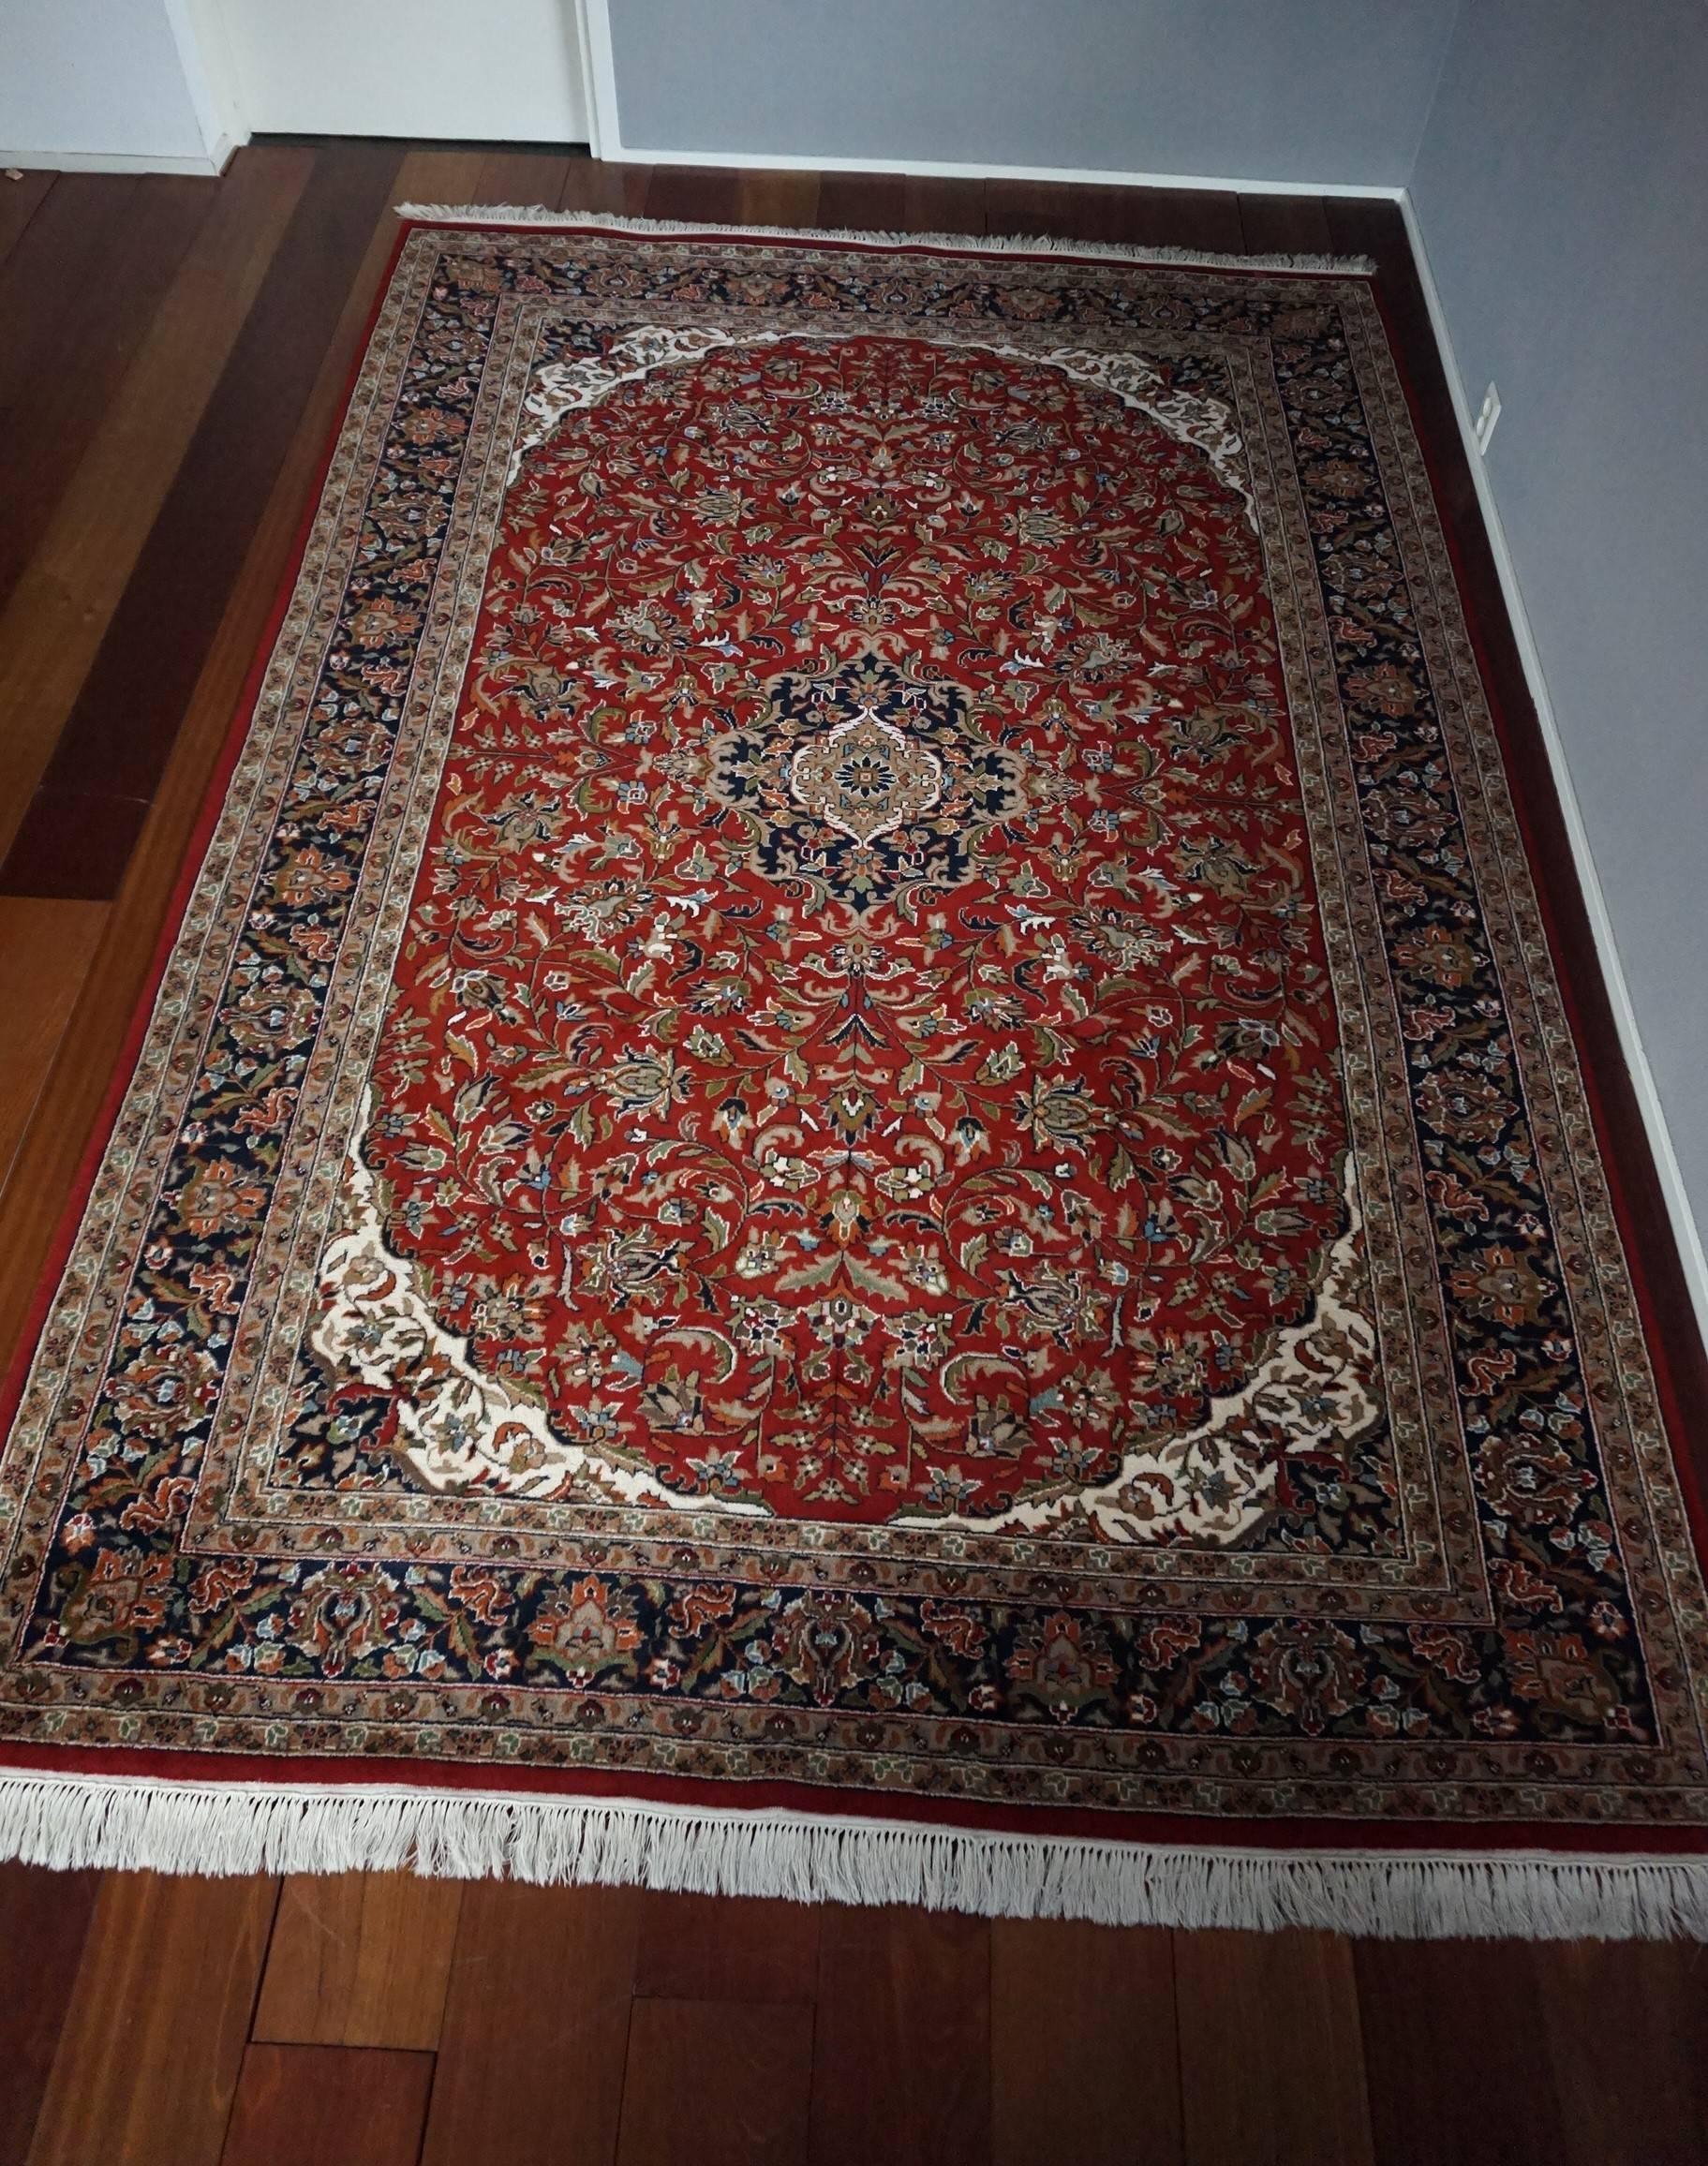 Wool Stunning Bidjar Rug Fine Design and Vibrant Colors Hand-Knotted and Long